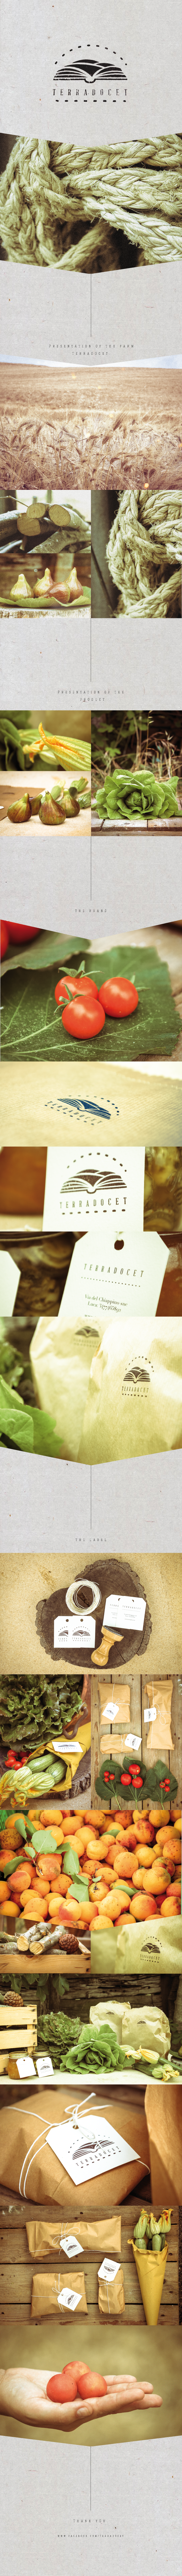 terradocet farm brand package land vegetables Label timbre